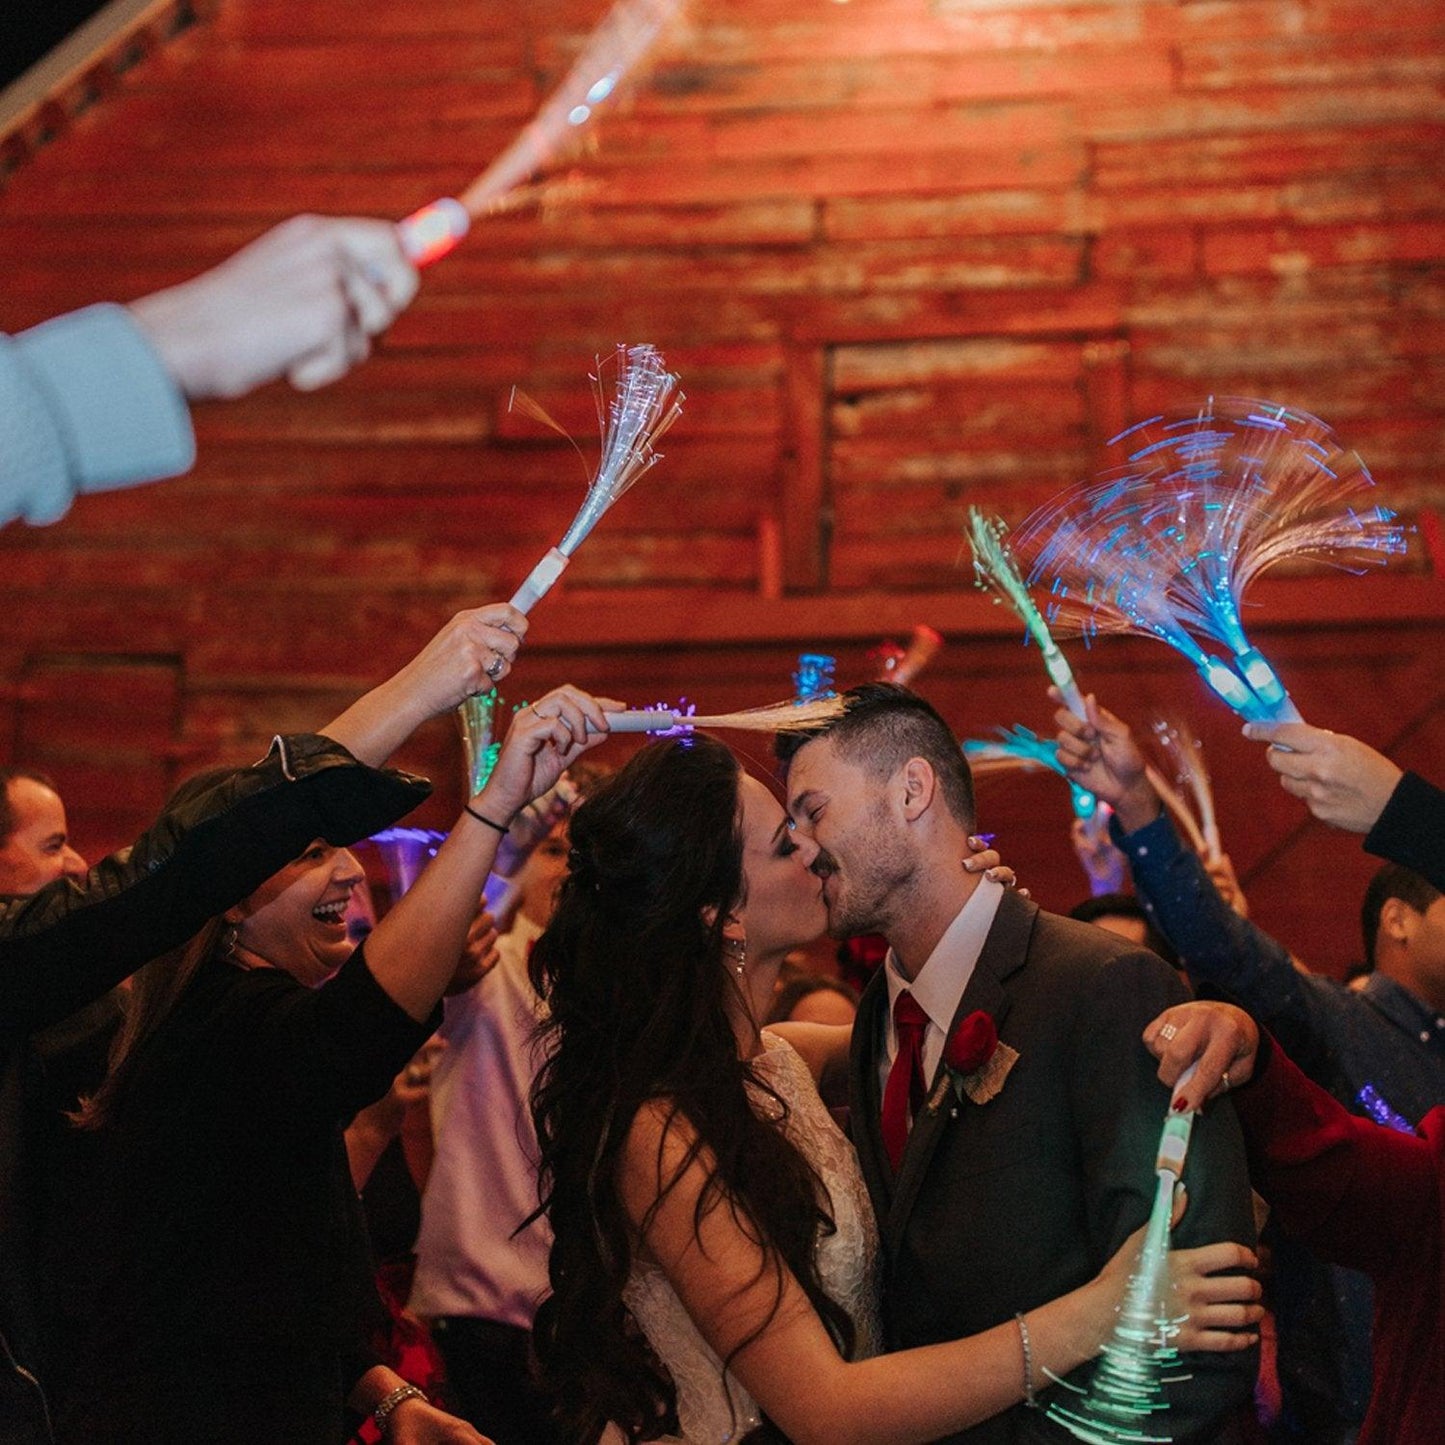 Led Fiber Optic Wands For Wedding, Night Time Wedding Send Off Ideas alternatives to sparklers - If you say i do